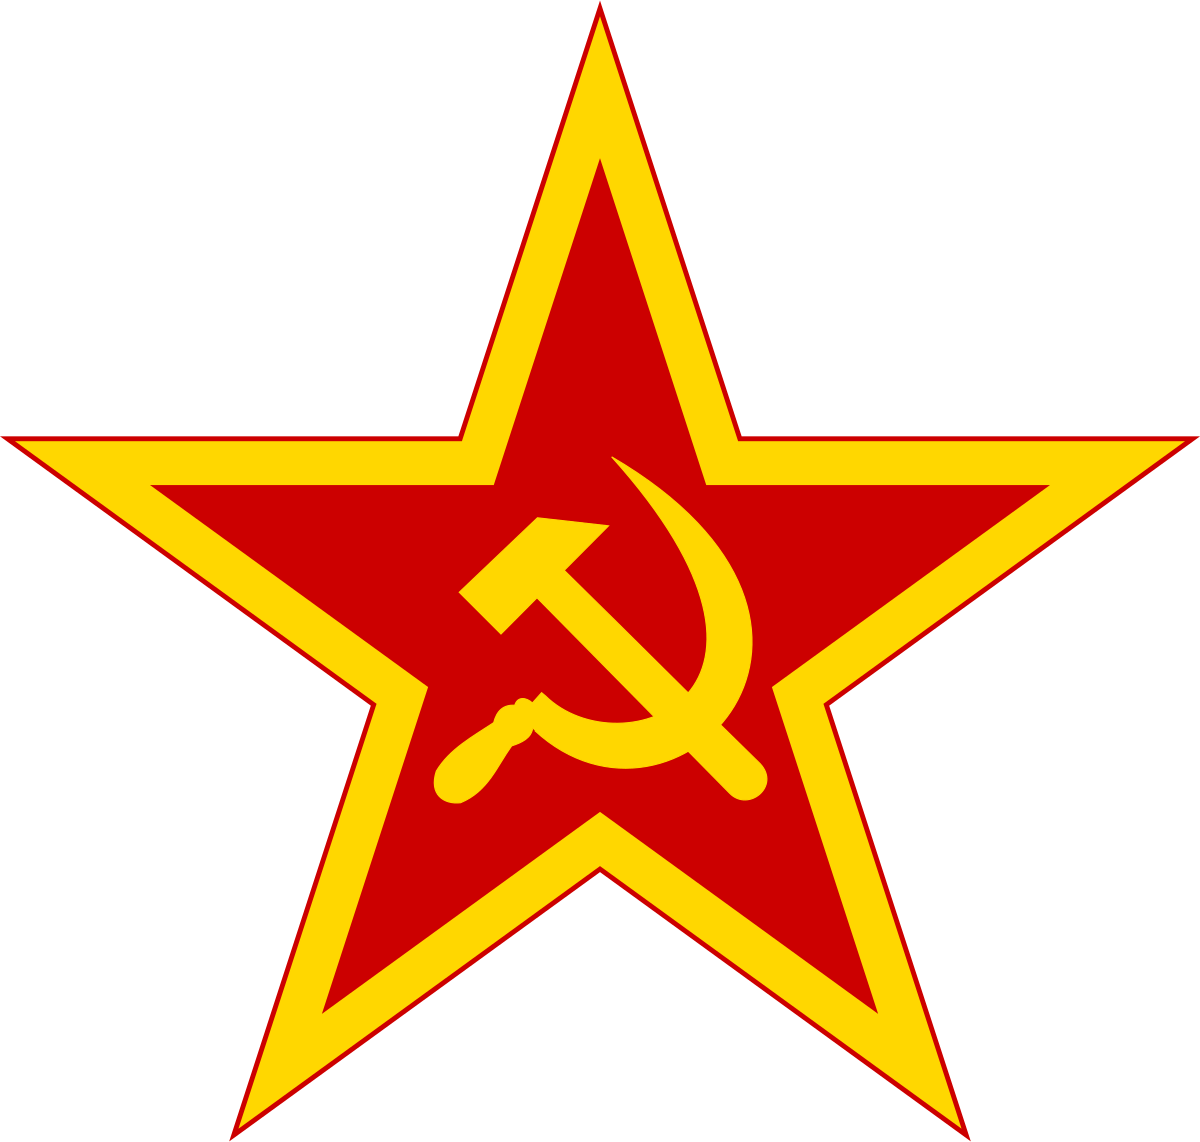 Yellow Flower with Red Outline Logo - Communist symbolism